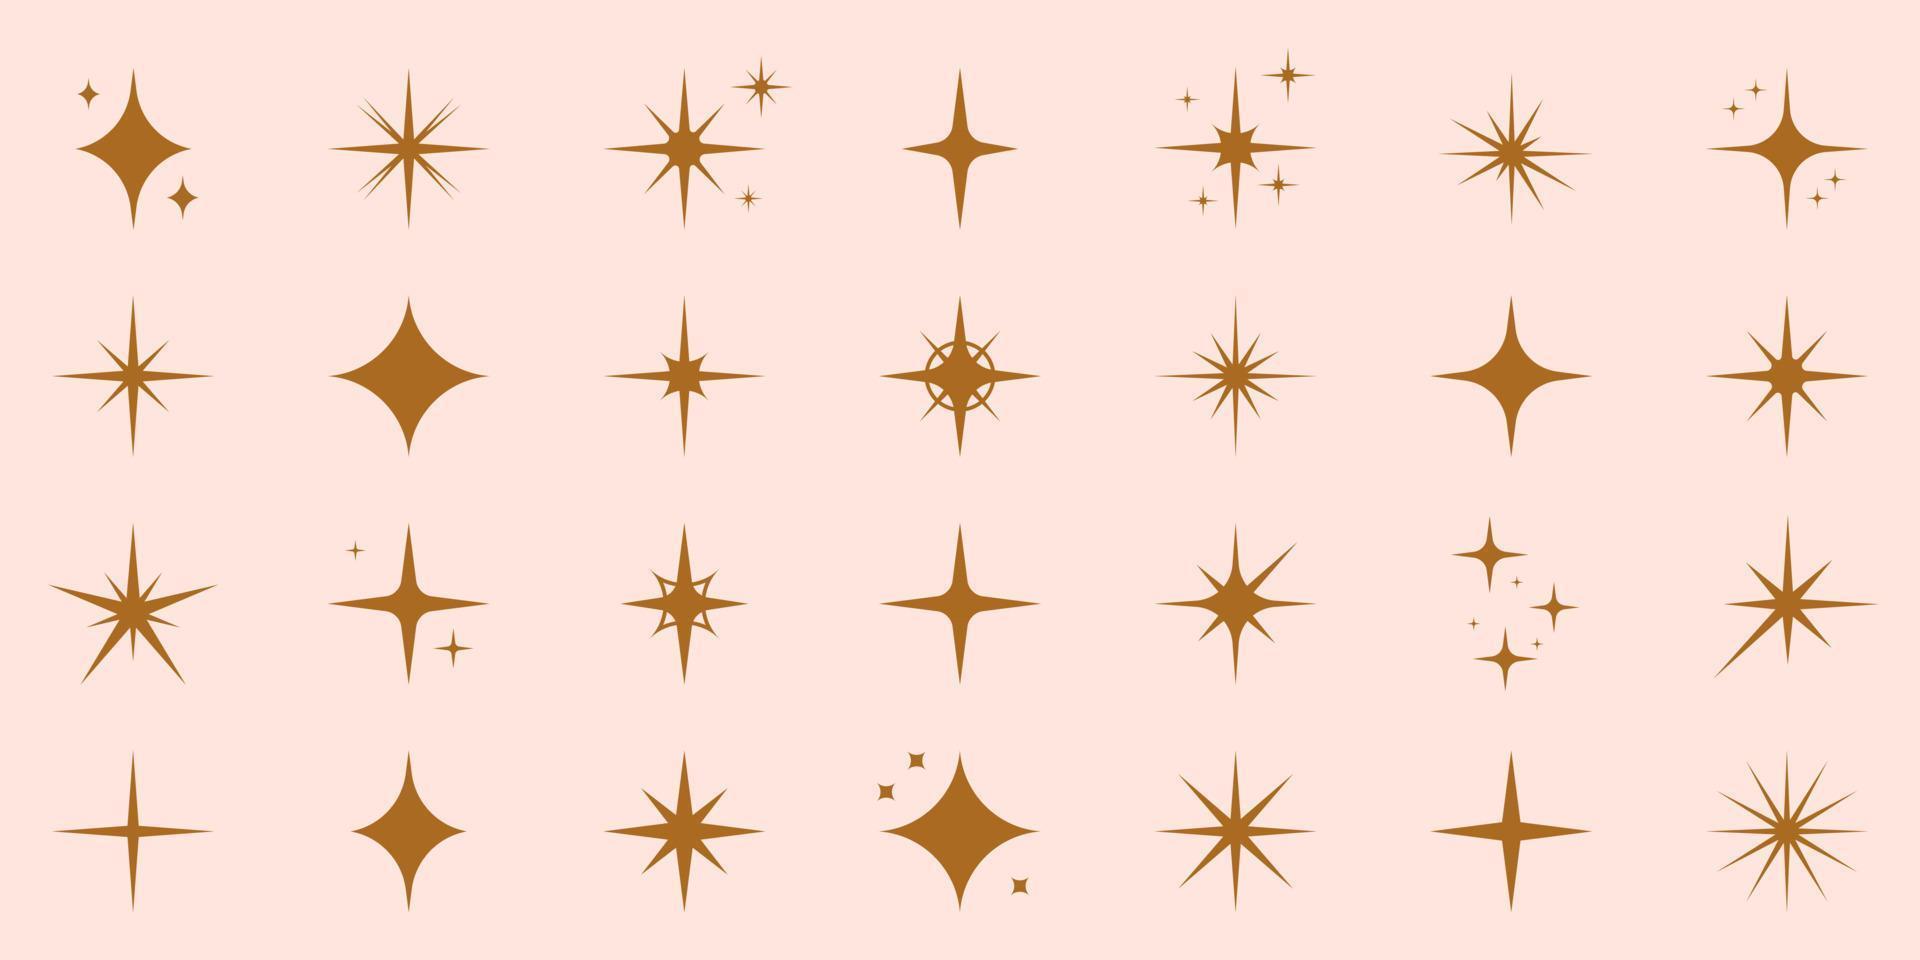 Sparkle Star Silhouette Icon Set. Glow Spark Flash Stars Pictogram Collection. Shine Burst Magic Decoration Symbol. Glistering Effect Light. Twinkle Flare. Isolated Vector Illustration.